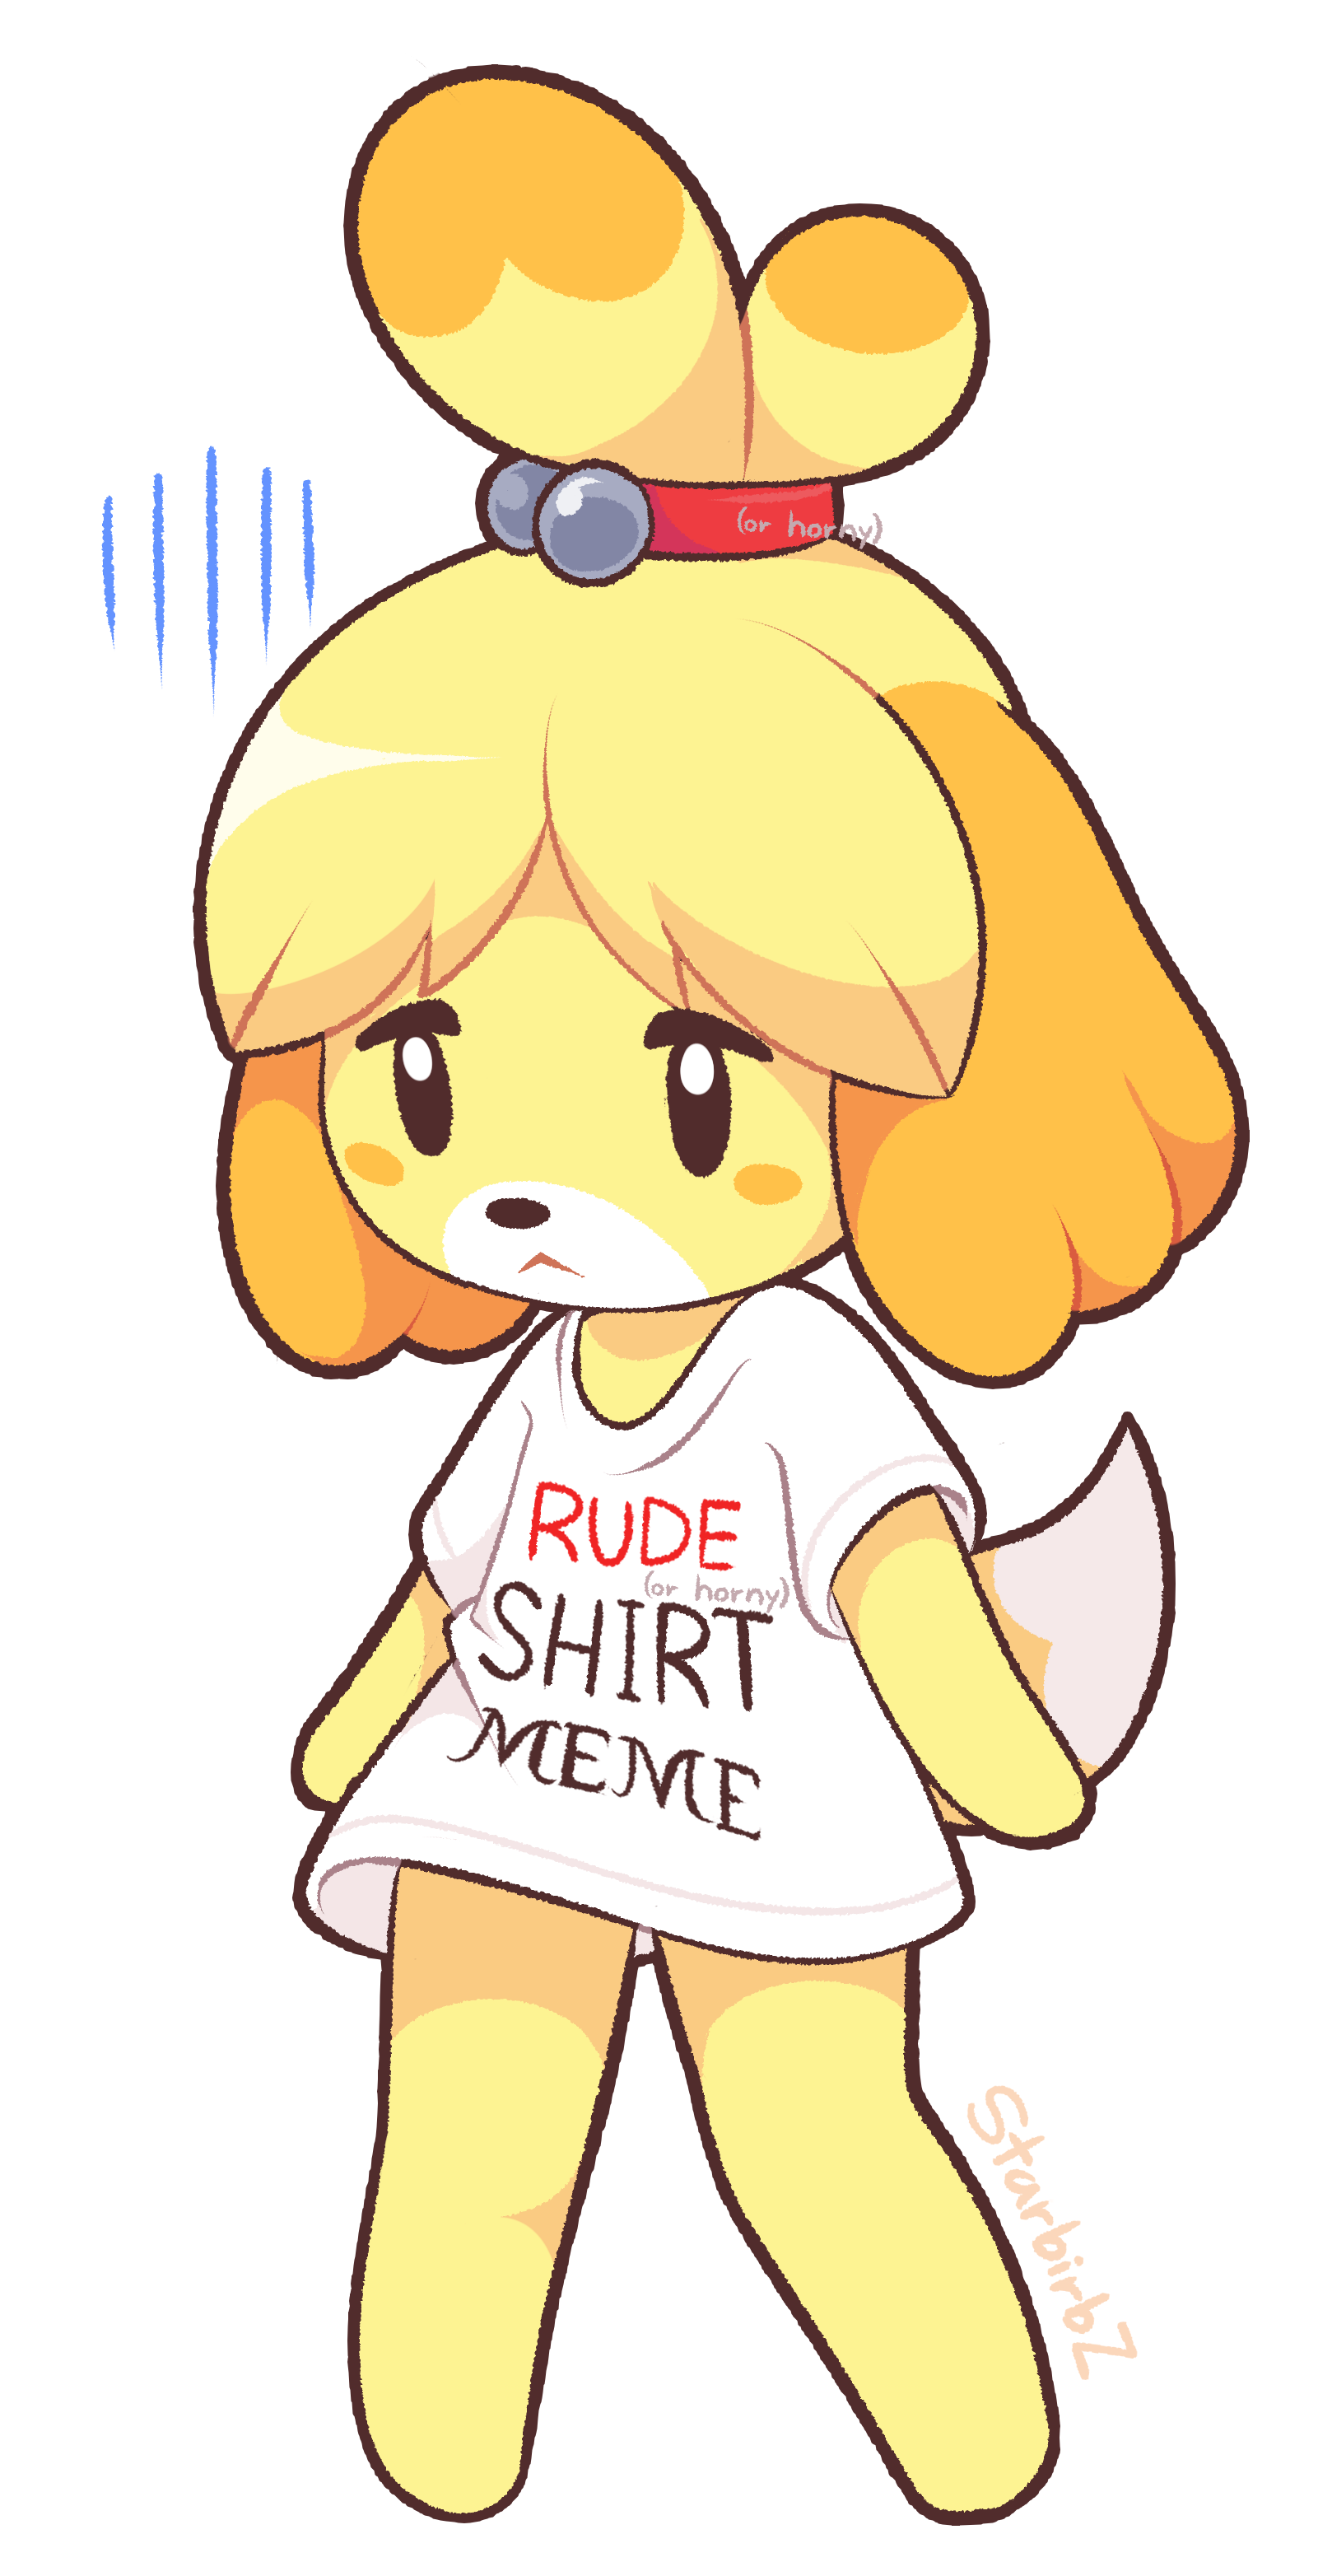 Isabelle animal crossing